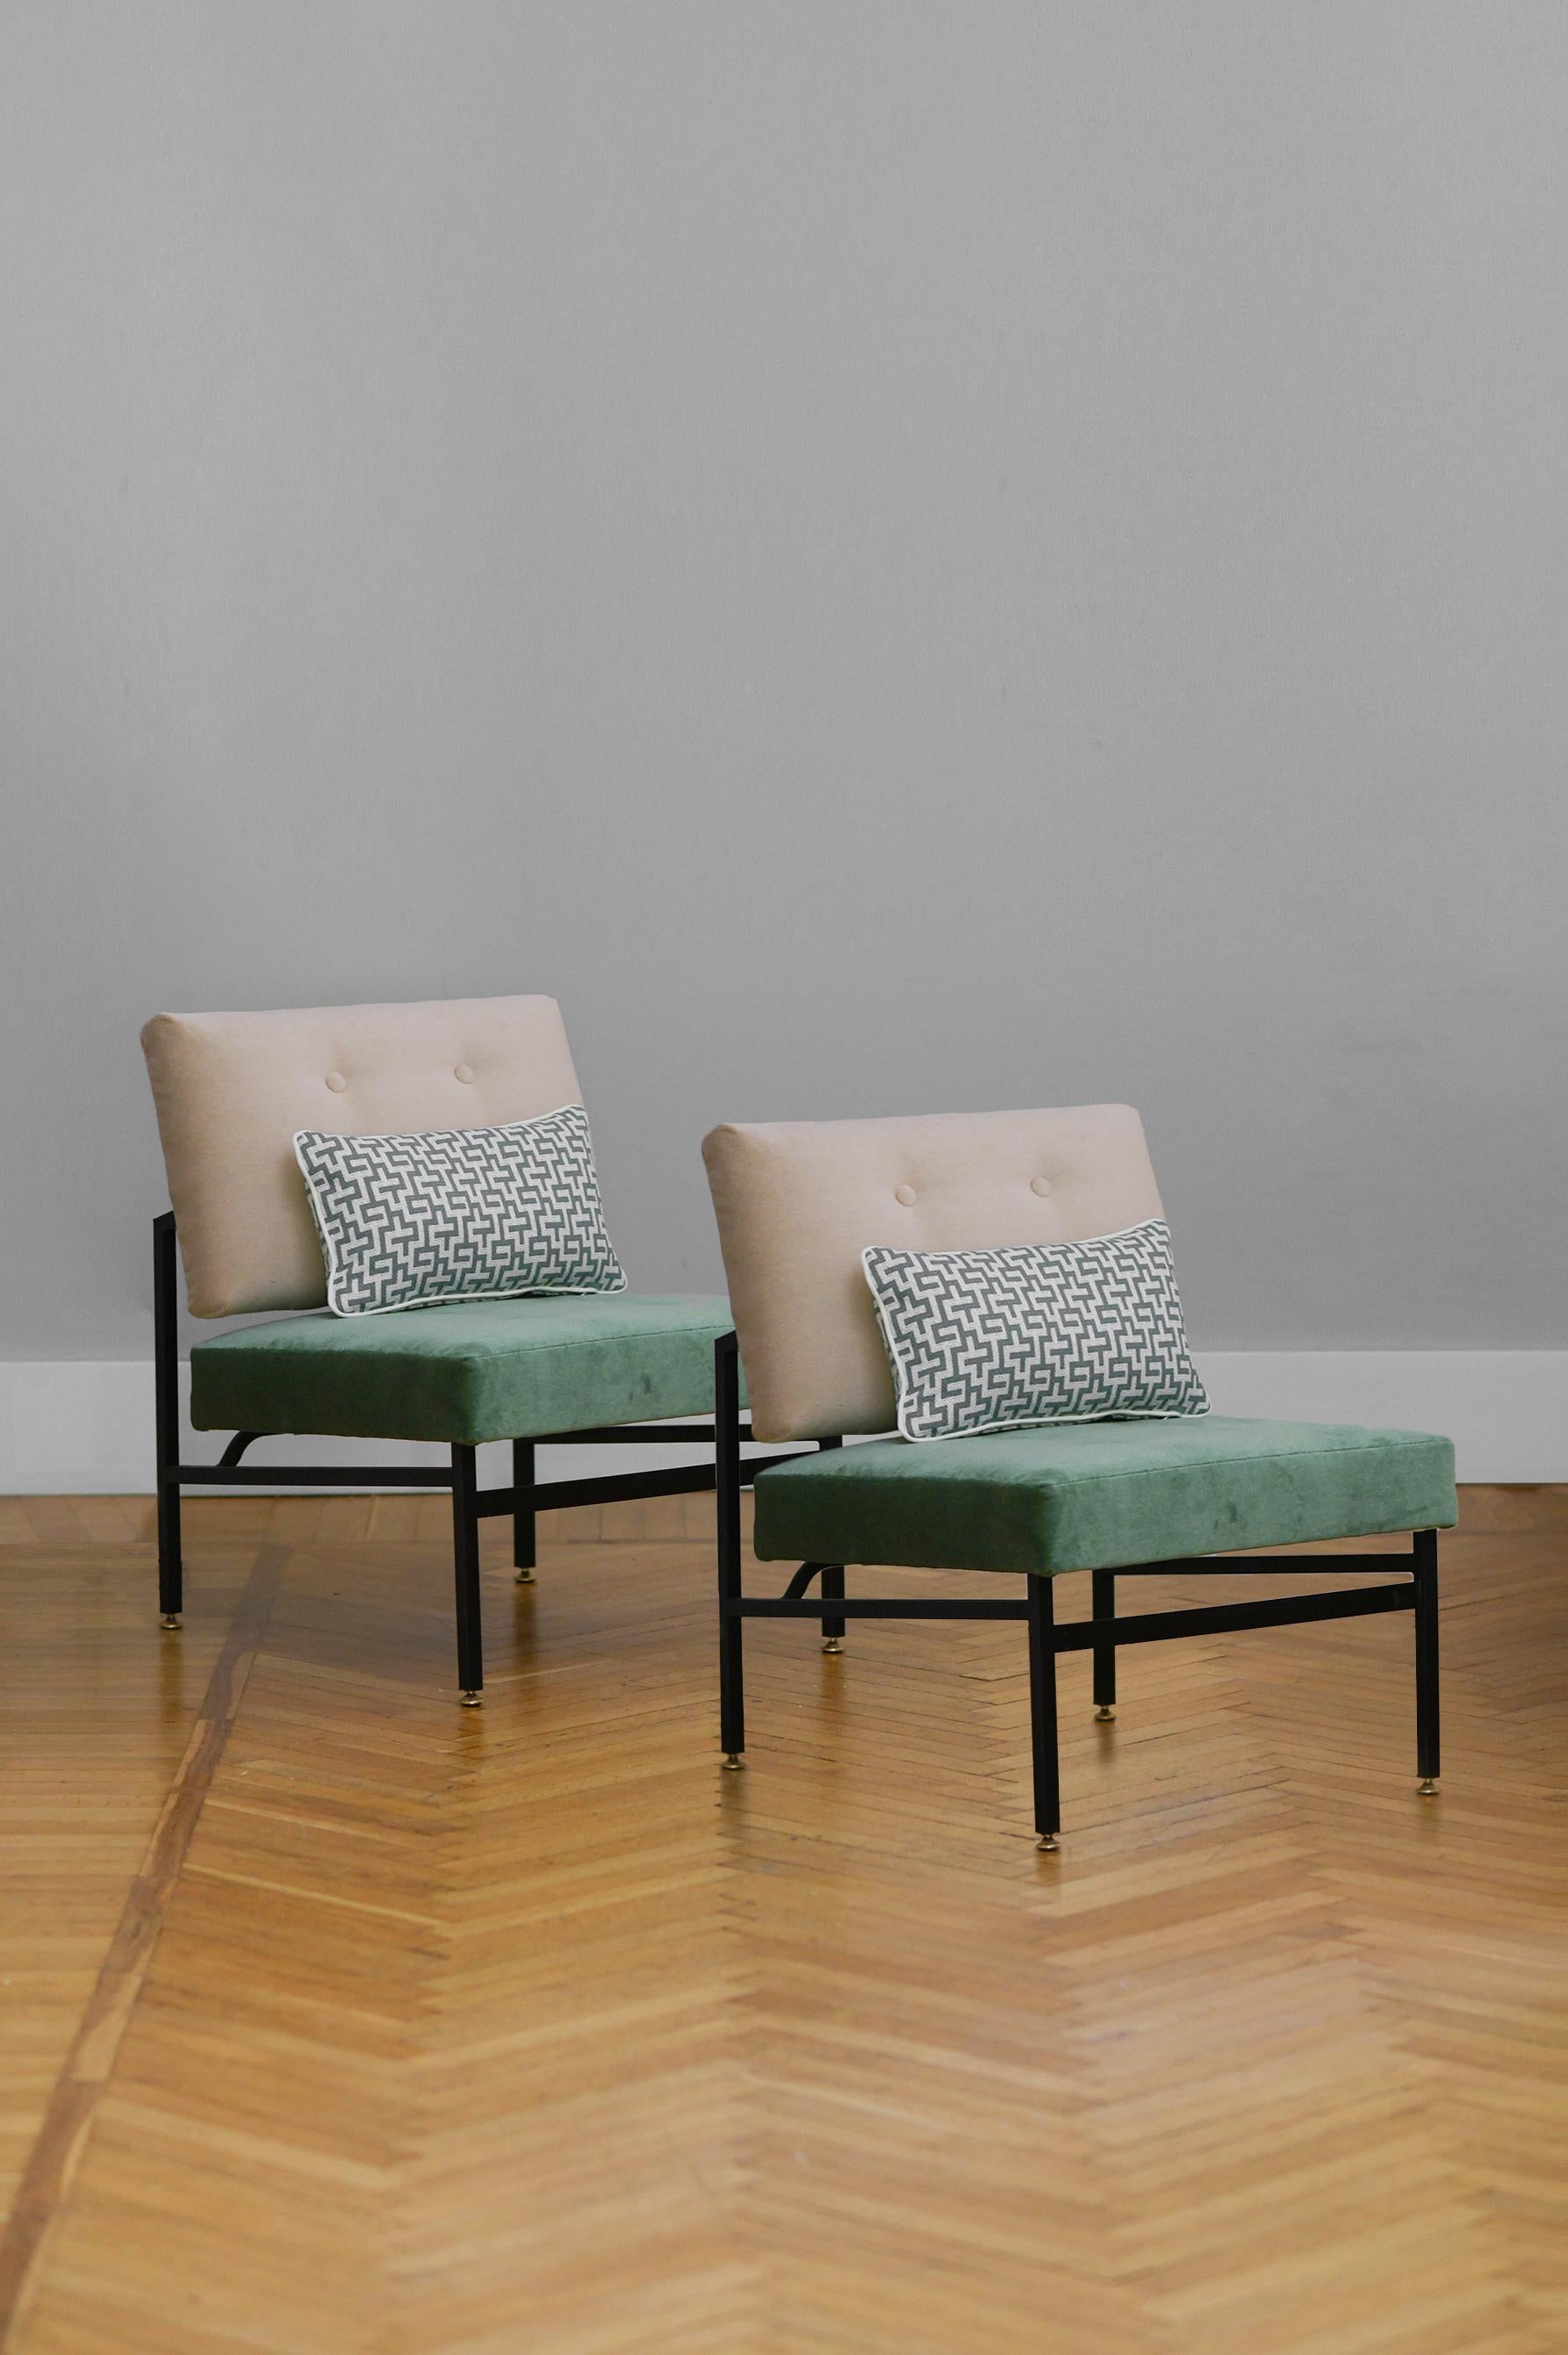 Set of 2 Mid Century armchairs in Dedar Milano fabric with metal structure.
The 2 armchairs are part of a set. The coordinated sofa bed can be bought separately (see our storefront)
Details
Dimensions of the single armchair: 58 l x 73 h x 80 p